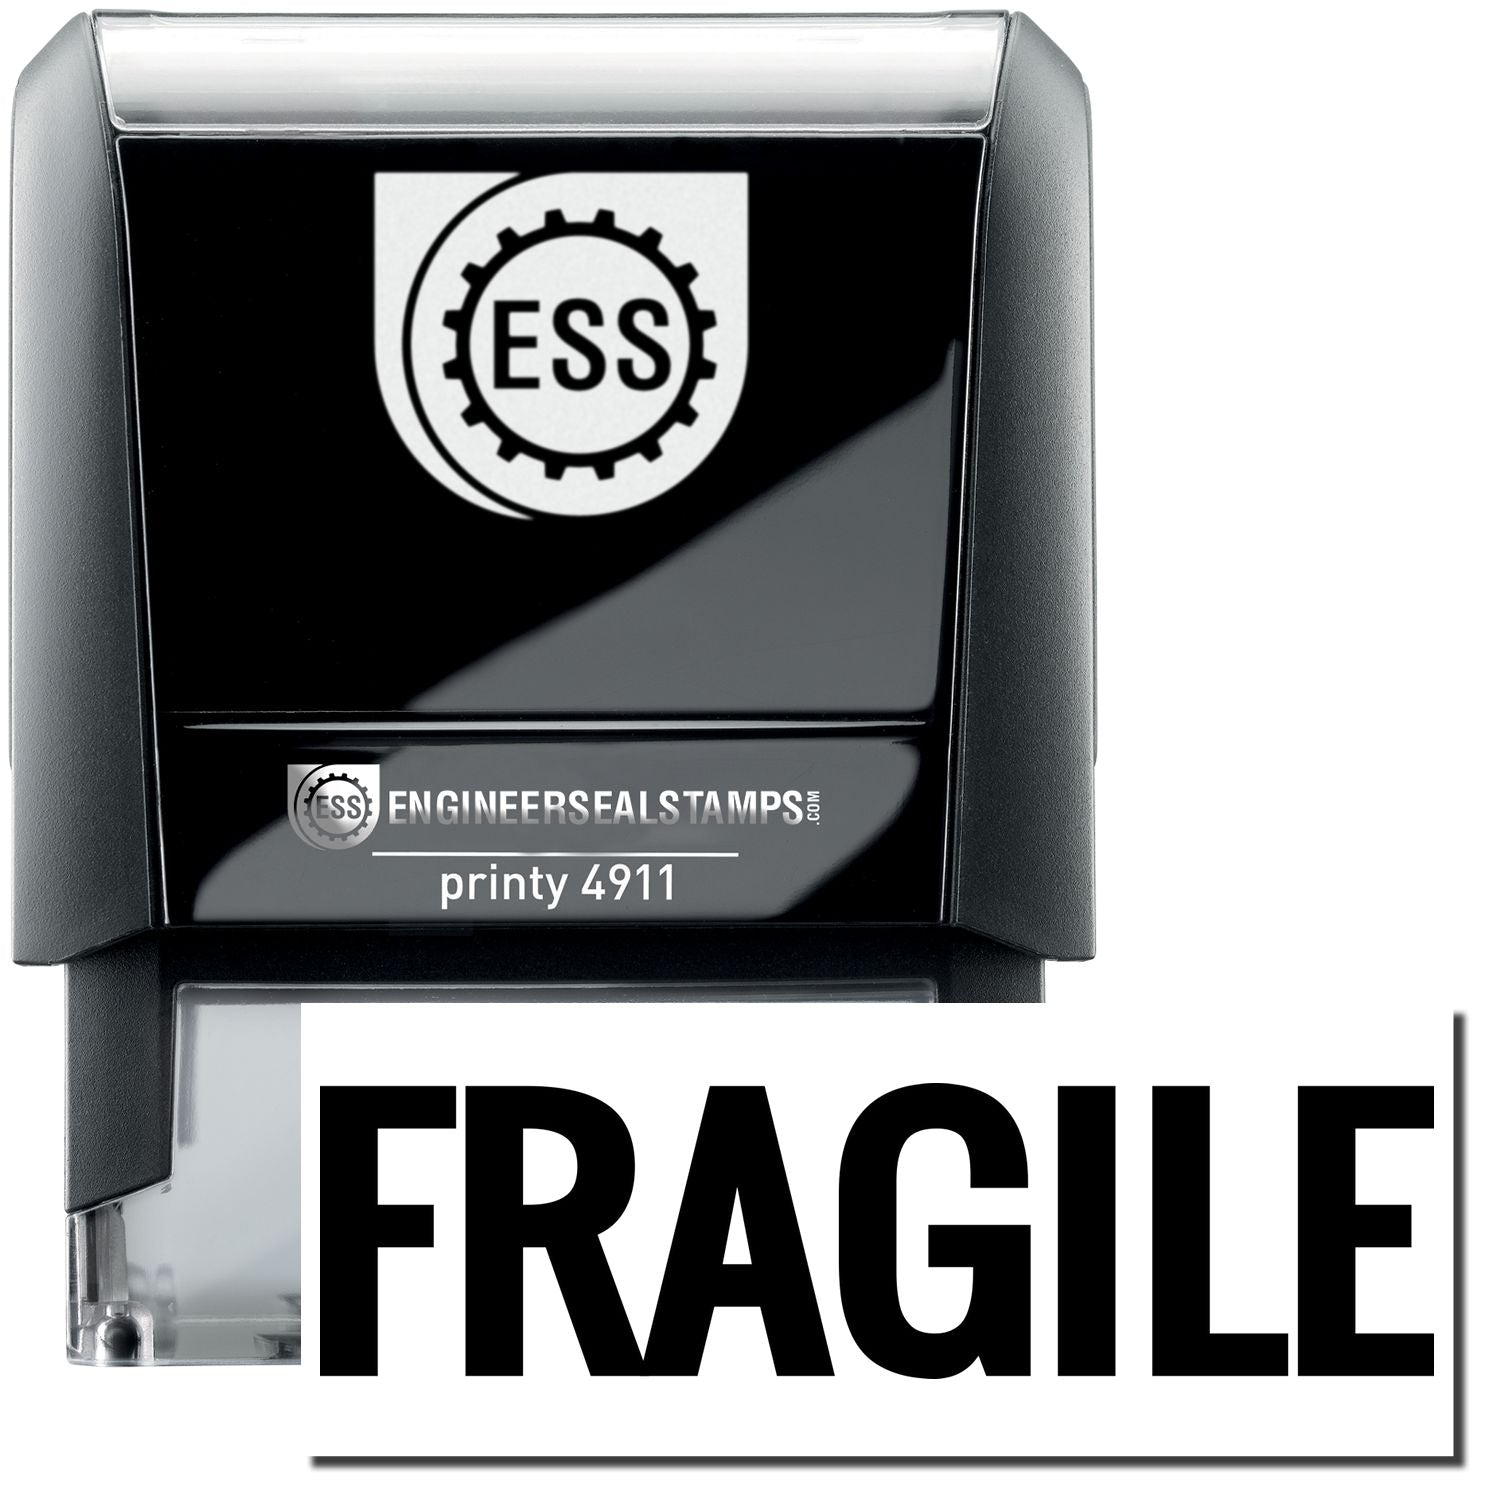 A self-inking stamp with a stamped image showing how the text "FRAGILE" in bold font is displayed after stamping.